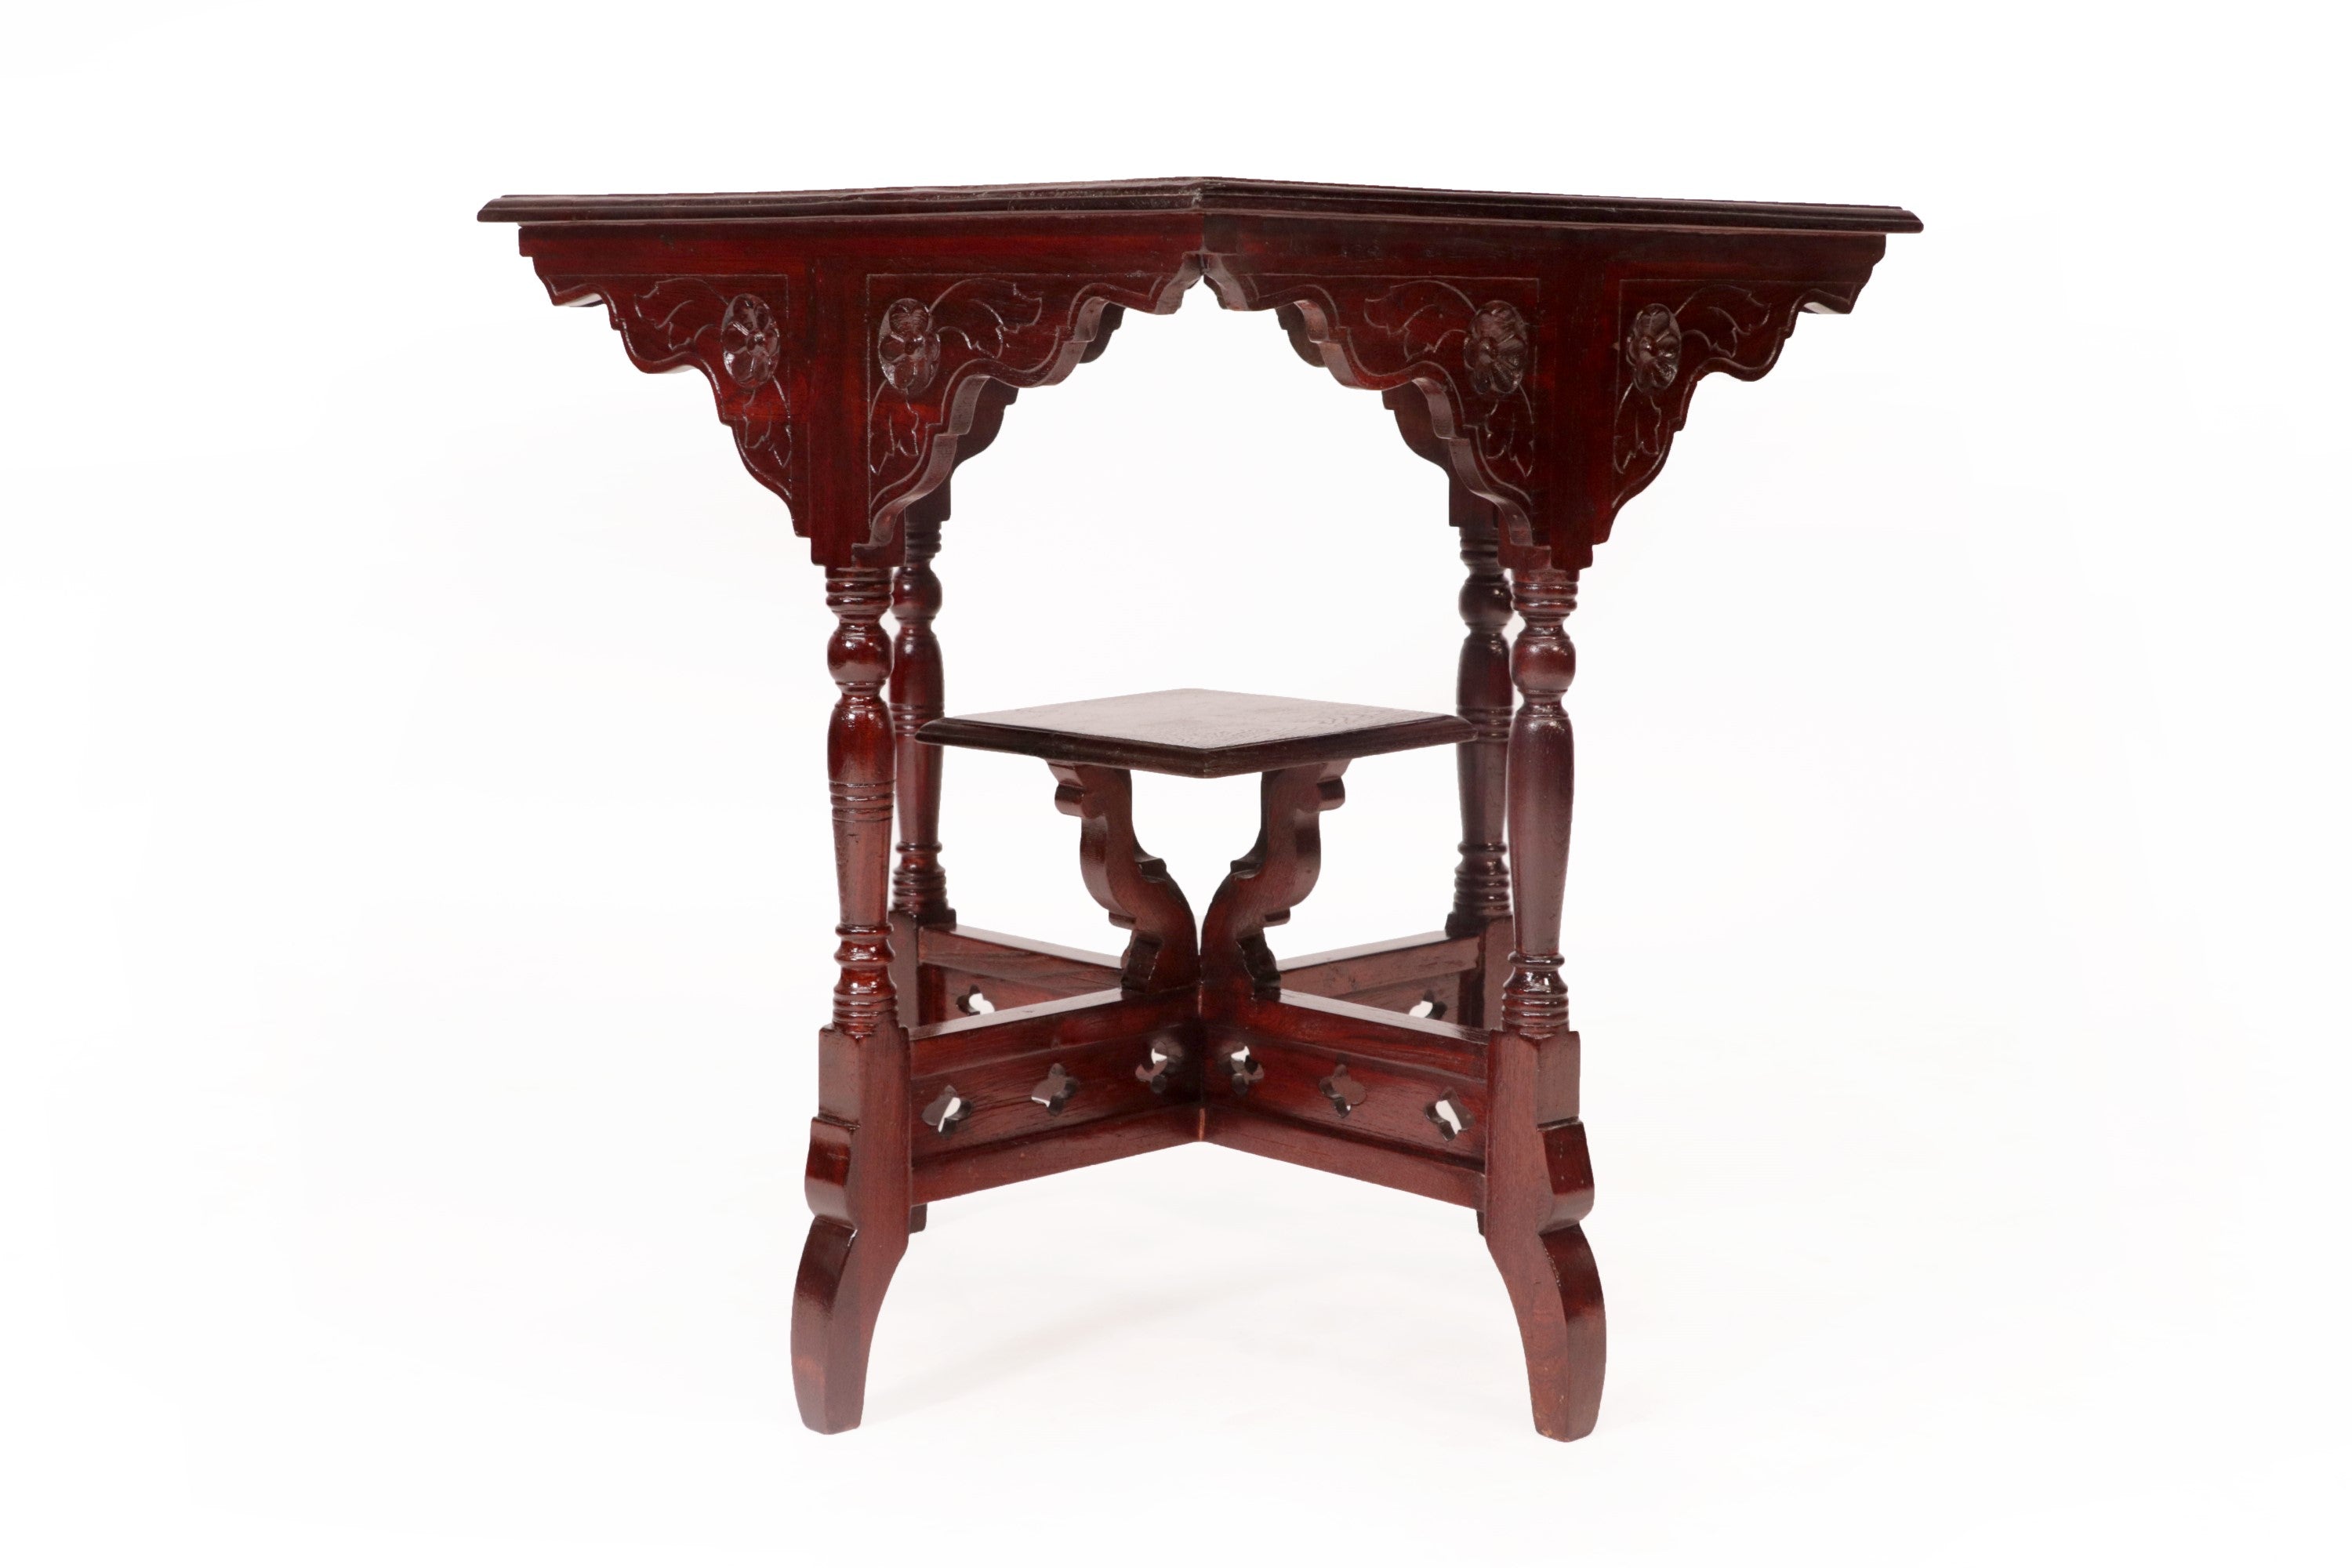 Teak Inquisitive concept Traditional Table End Table